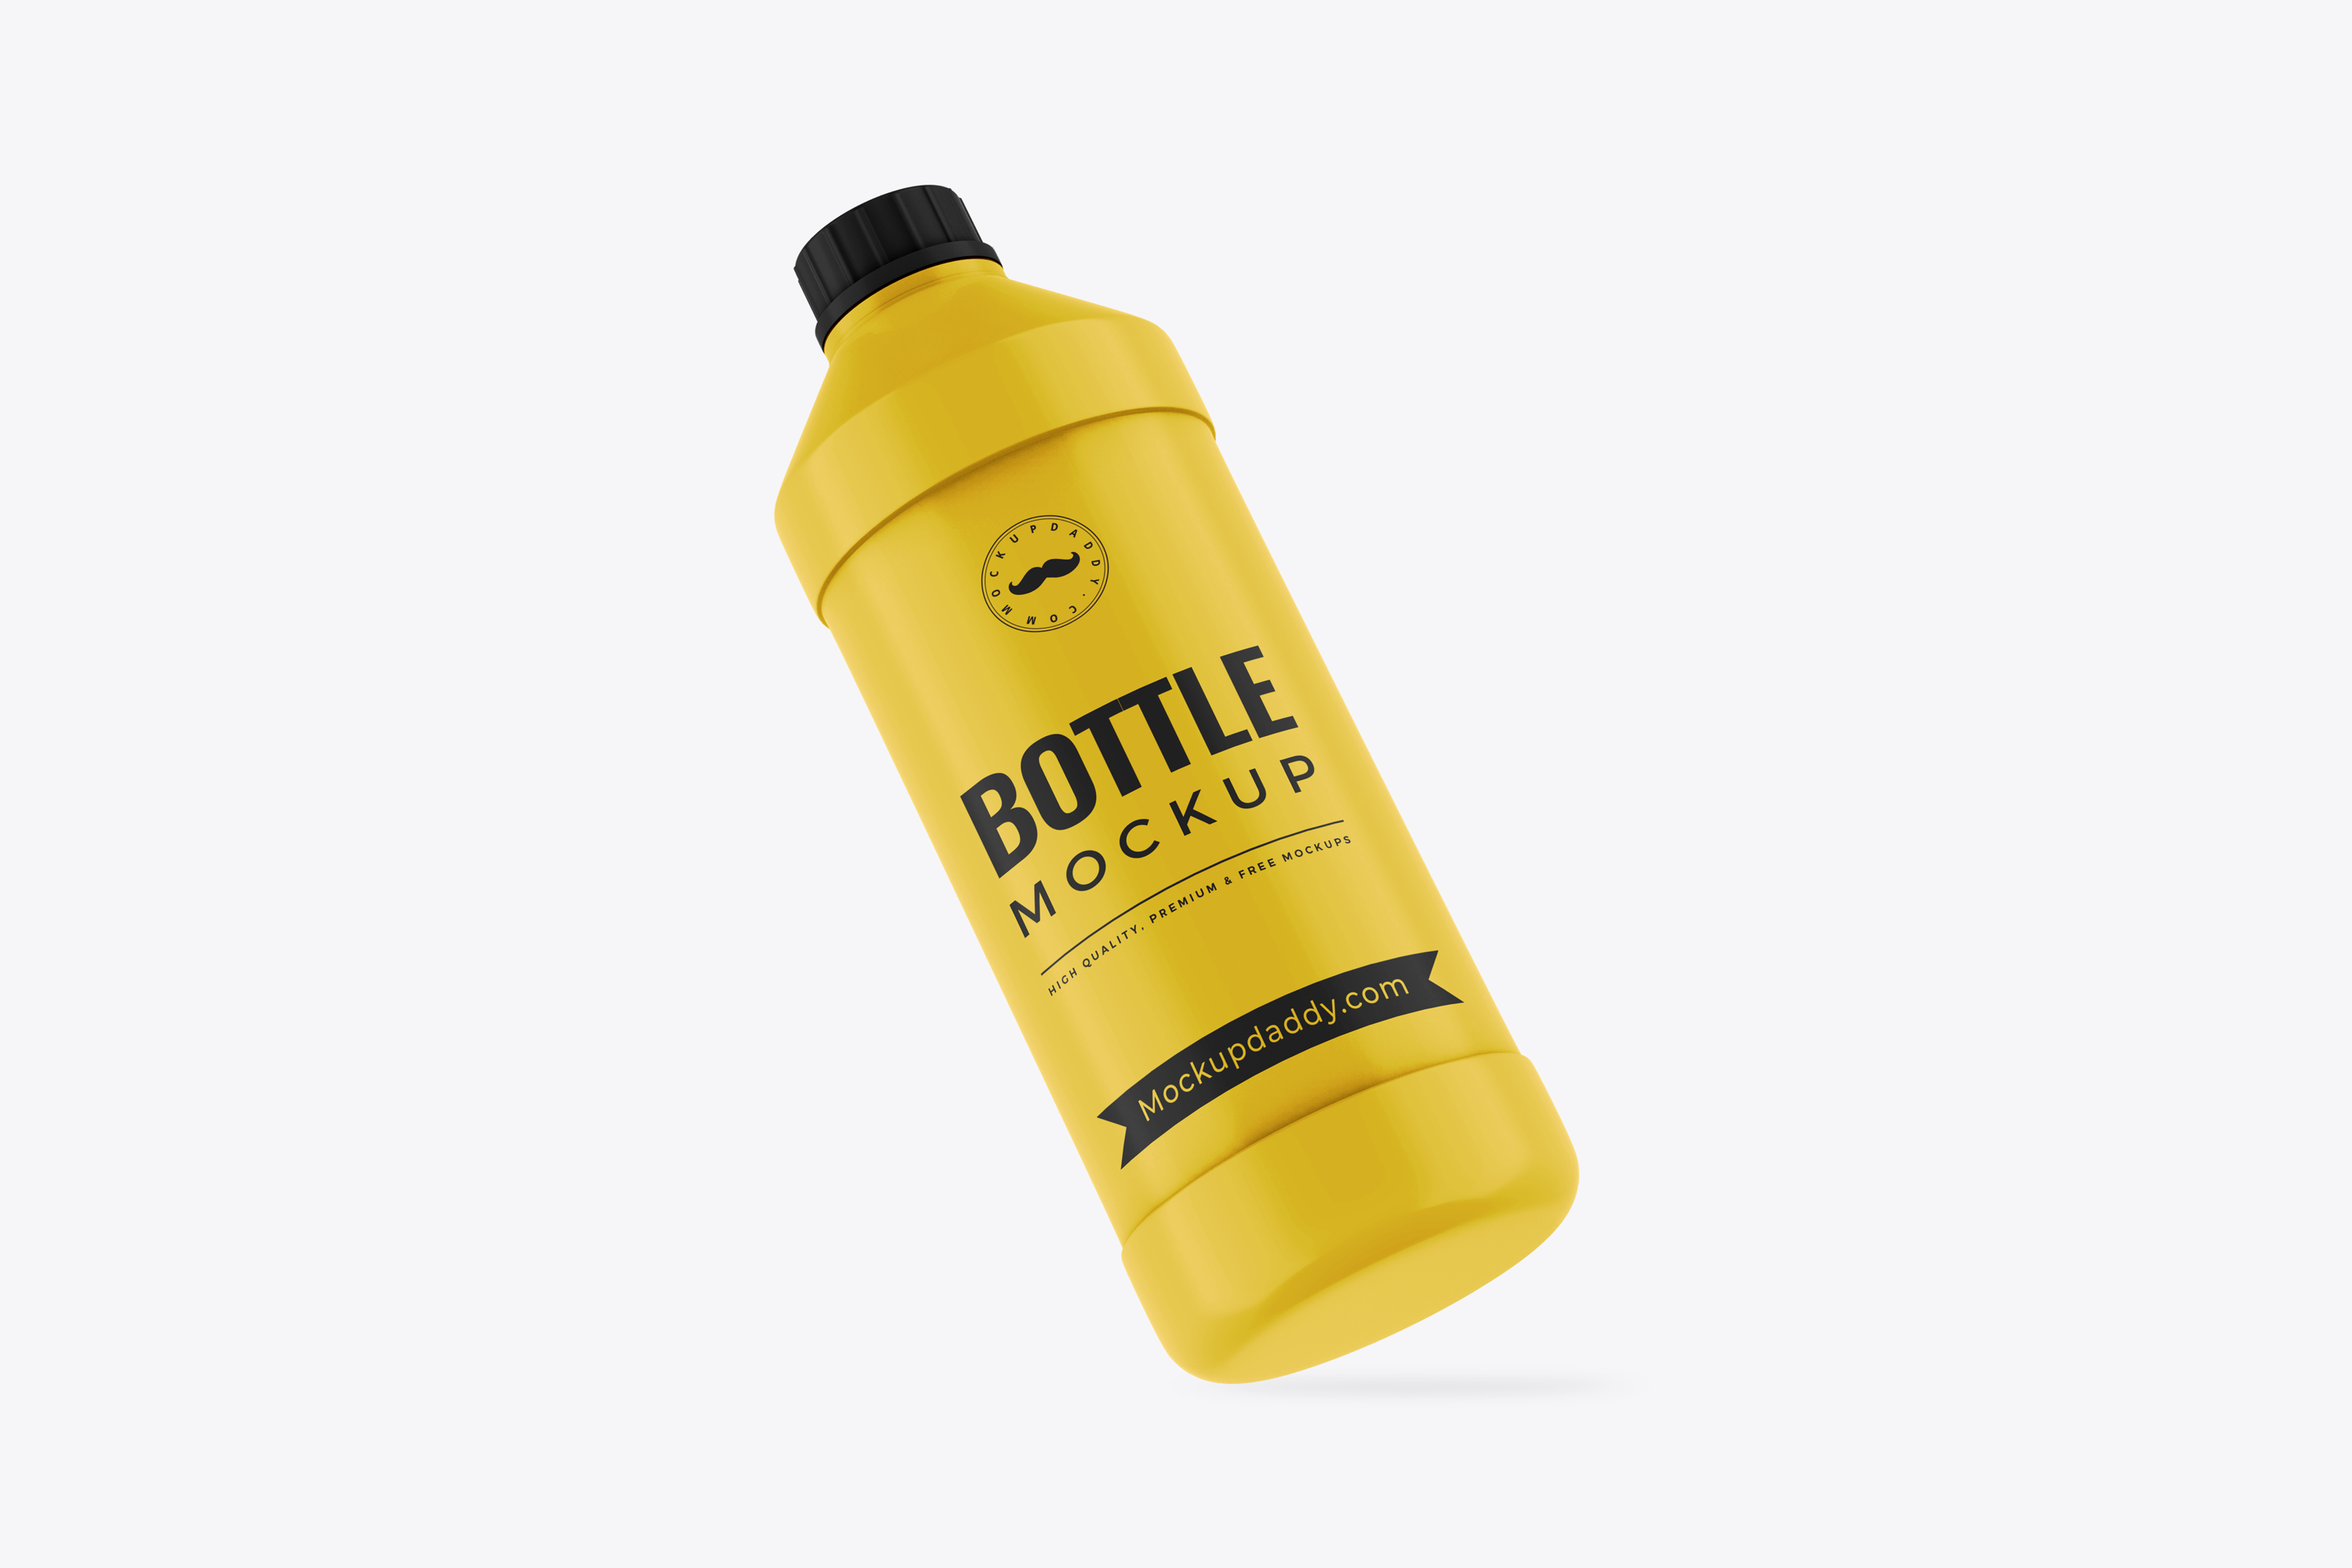 Floating Yellow Detergent Bottle Mockup on white background with black cap